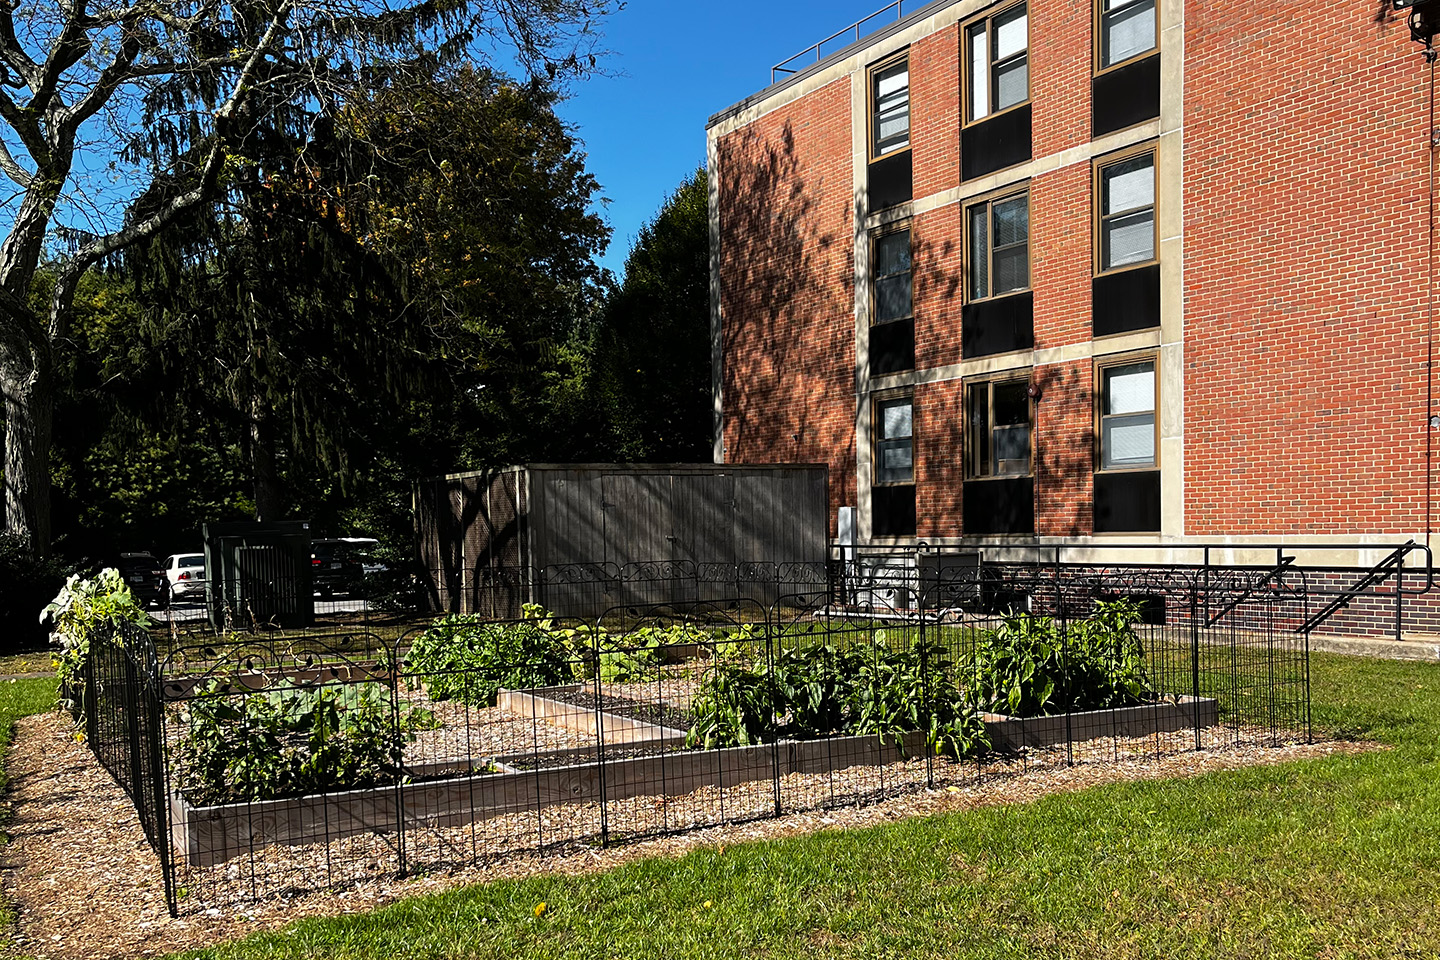 External view of the ӰƬ University Community Garden behind the Linen Hall residence hall.